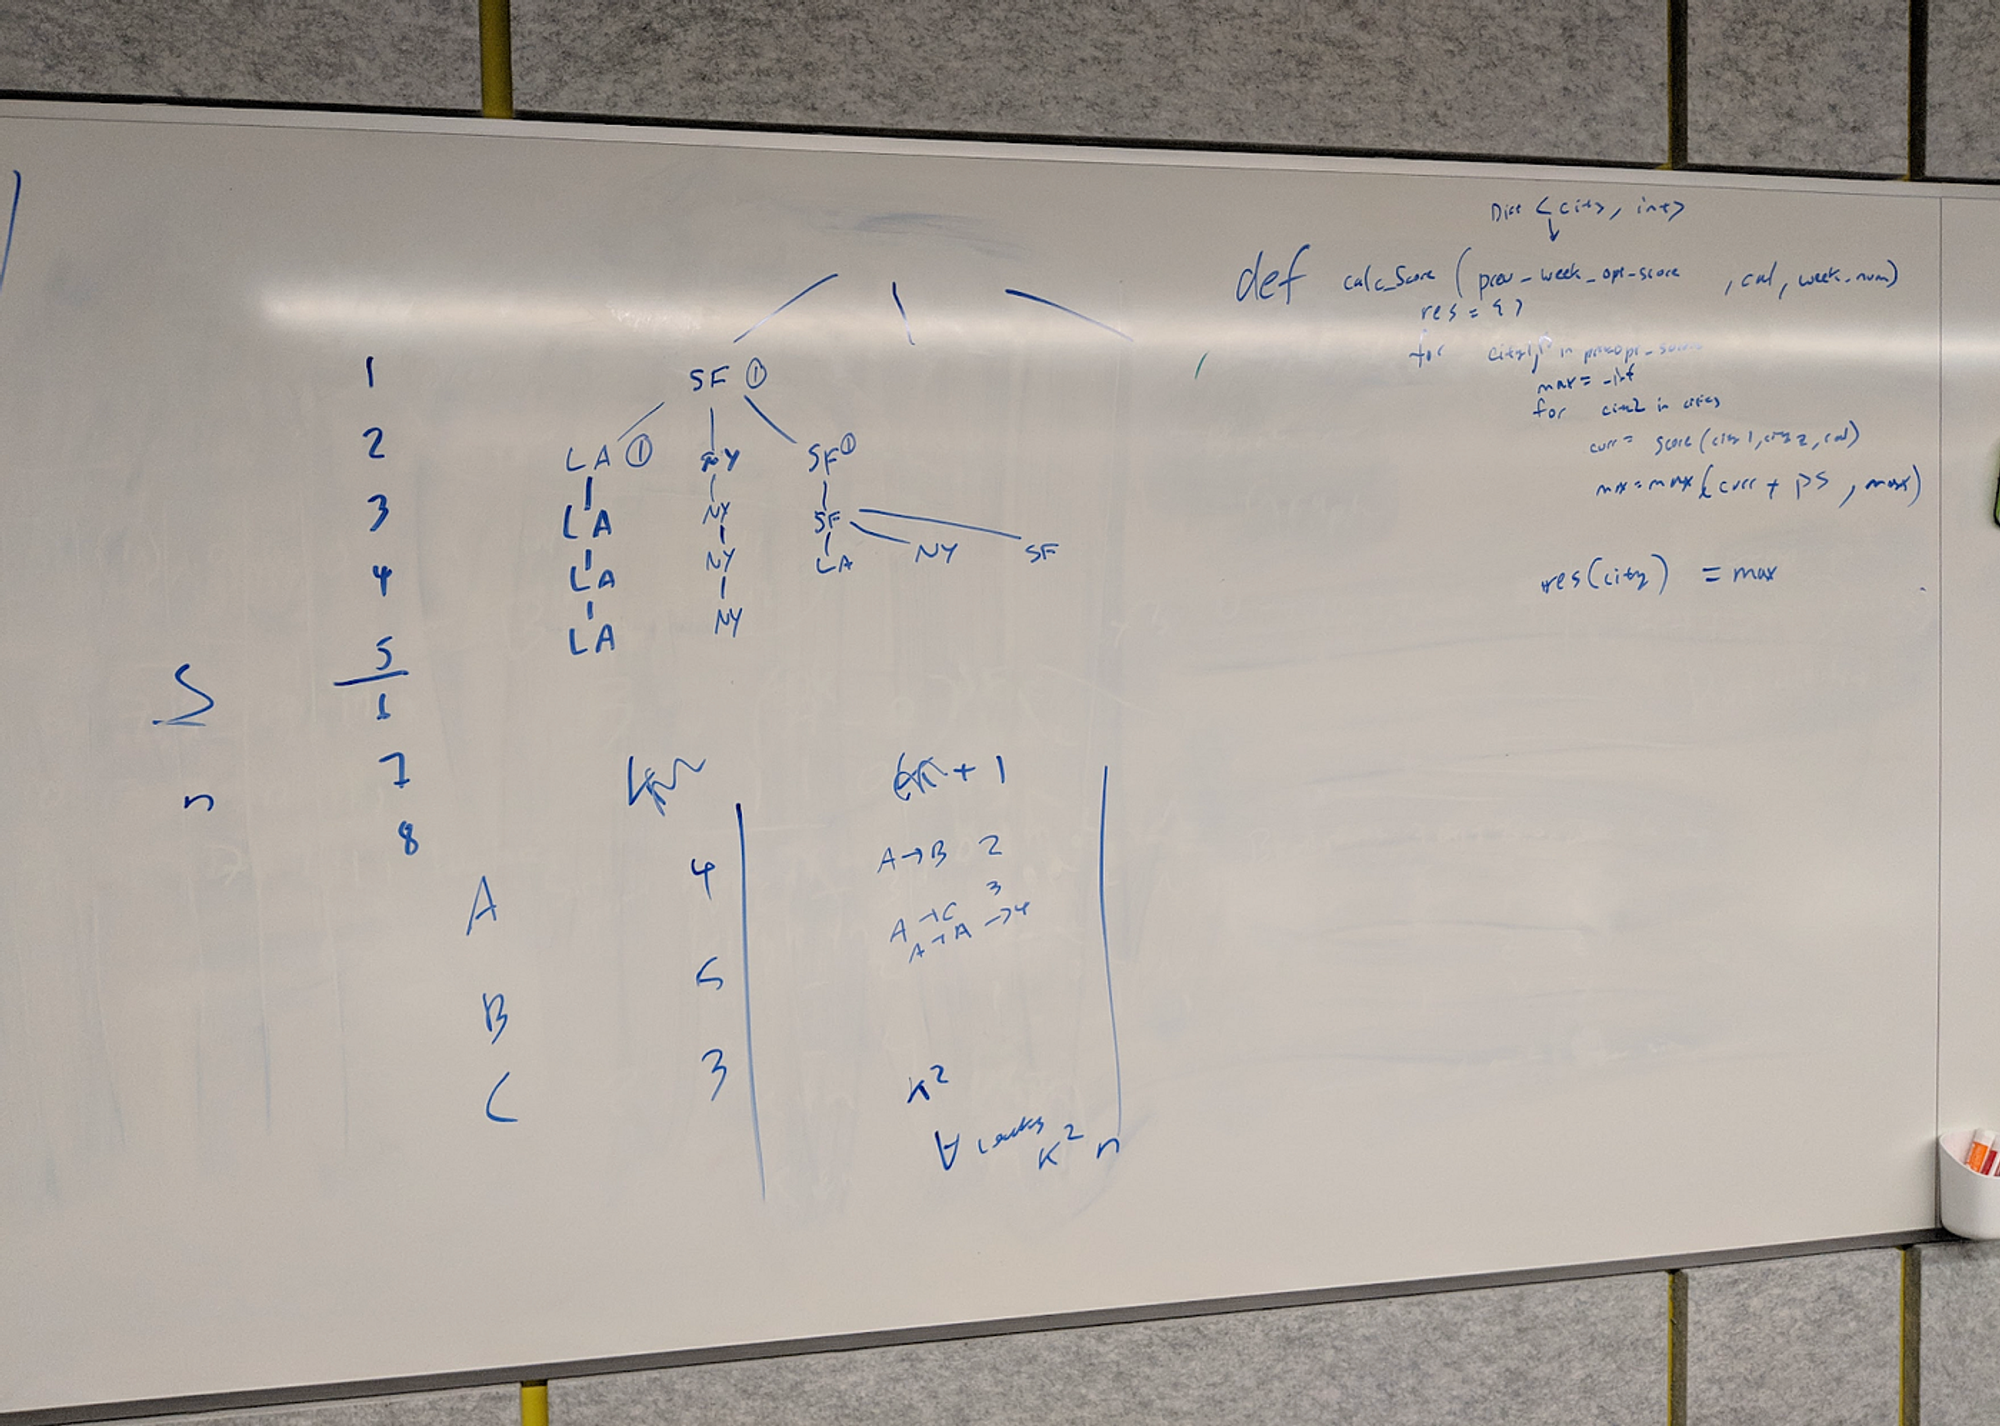 I did a lot of whiteboard problems with friends in their offices after work hours